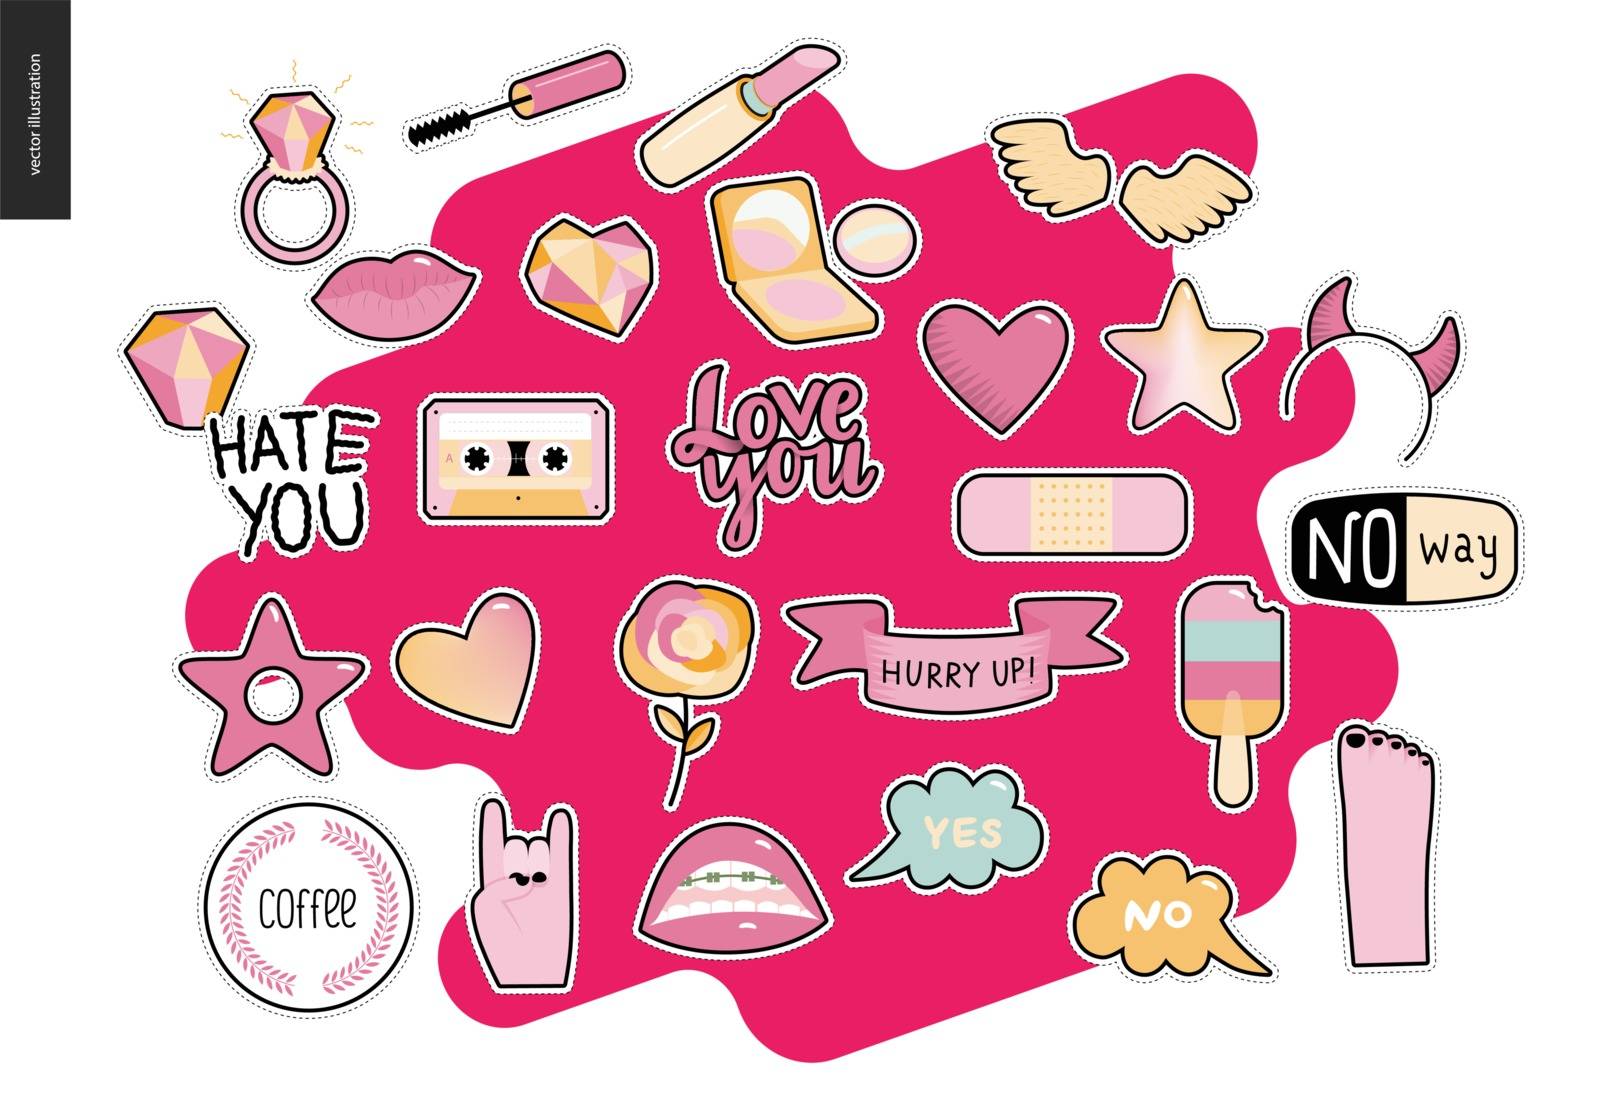 Set of contemporary girlish patches elements. A set of vector girl stuff including cosmetics, lips, hands, hearts, stars, wings, and few writings. Vector stickers kit.